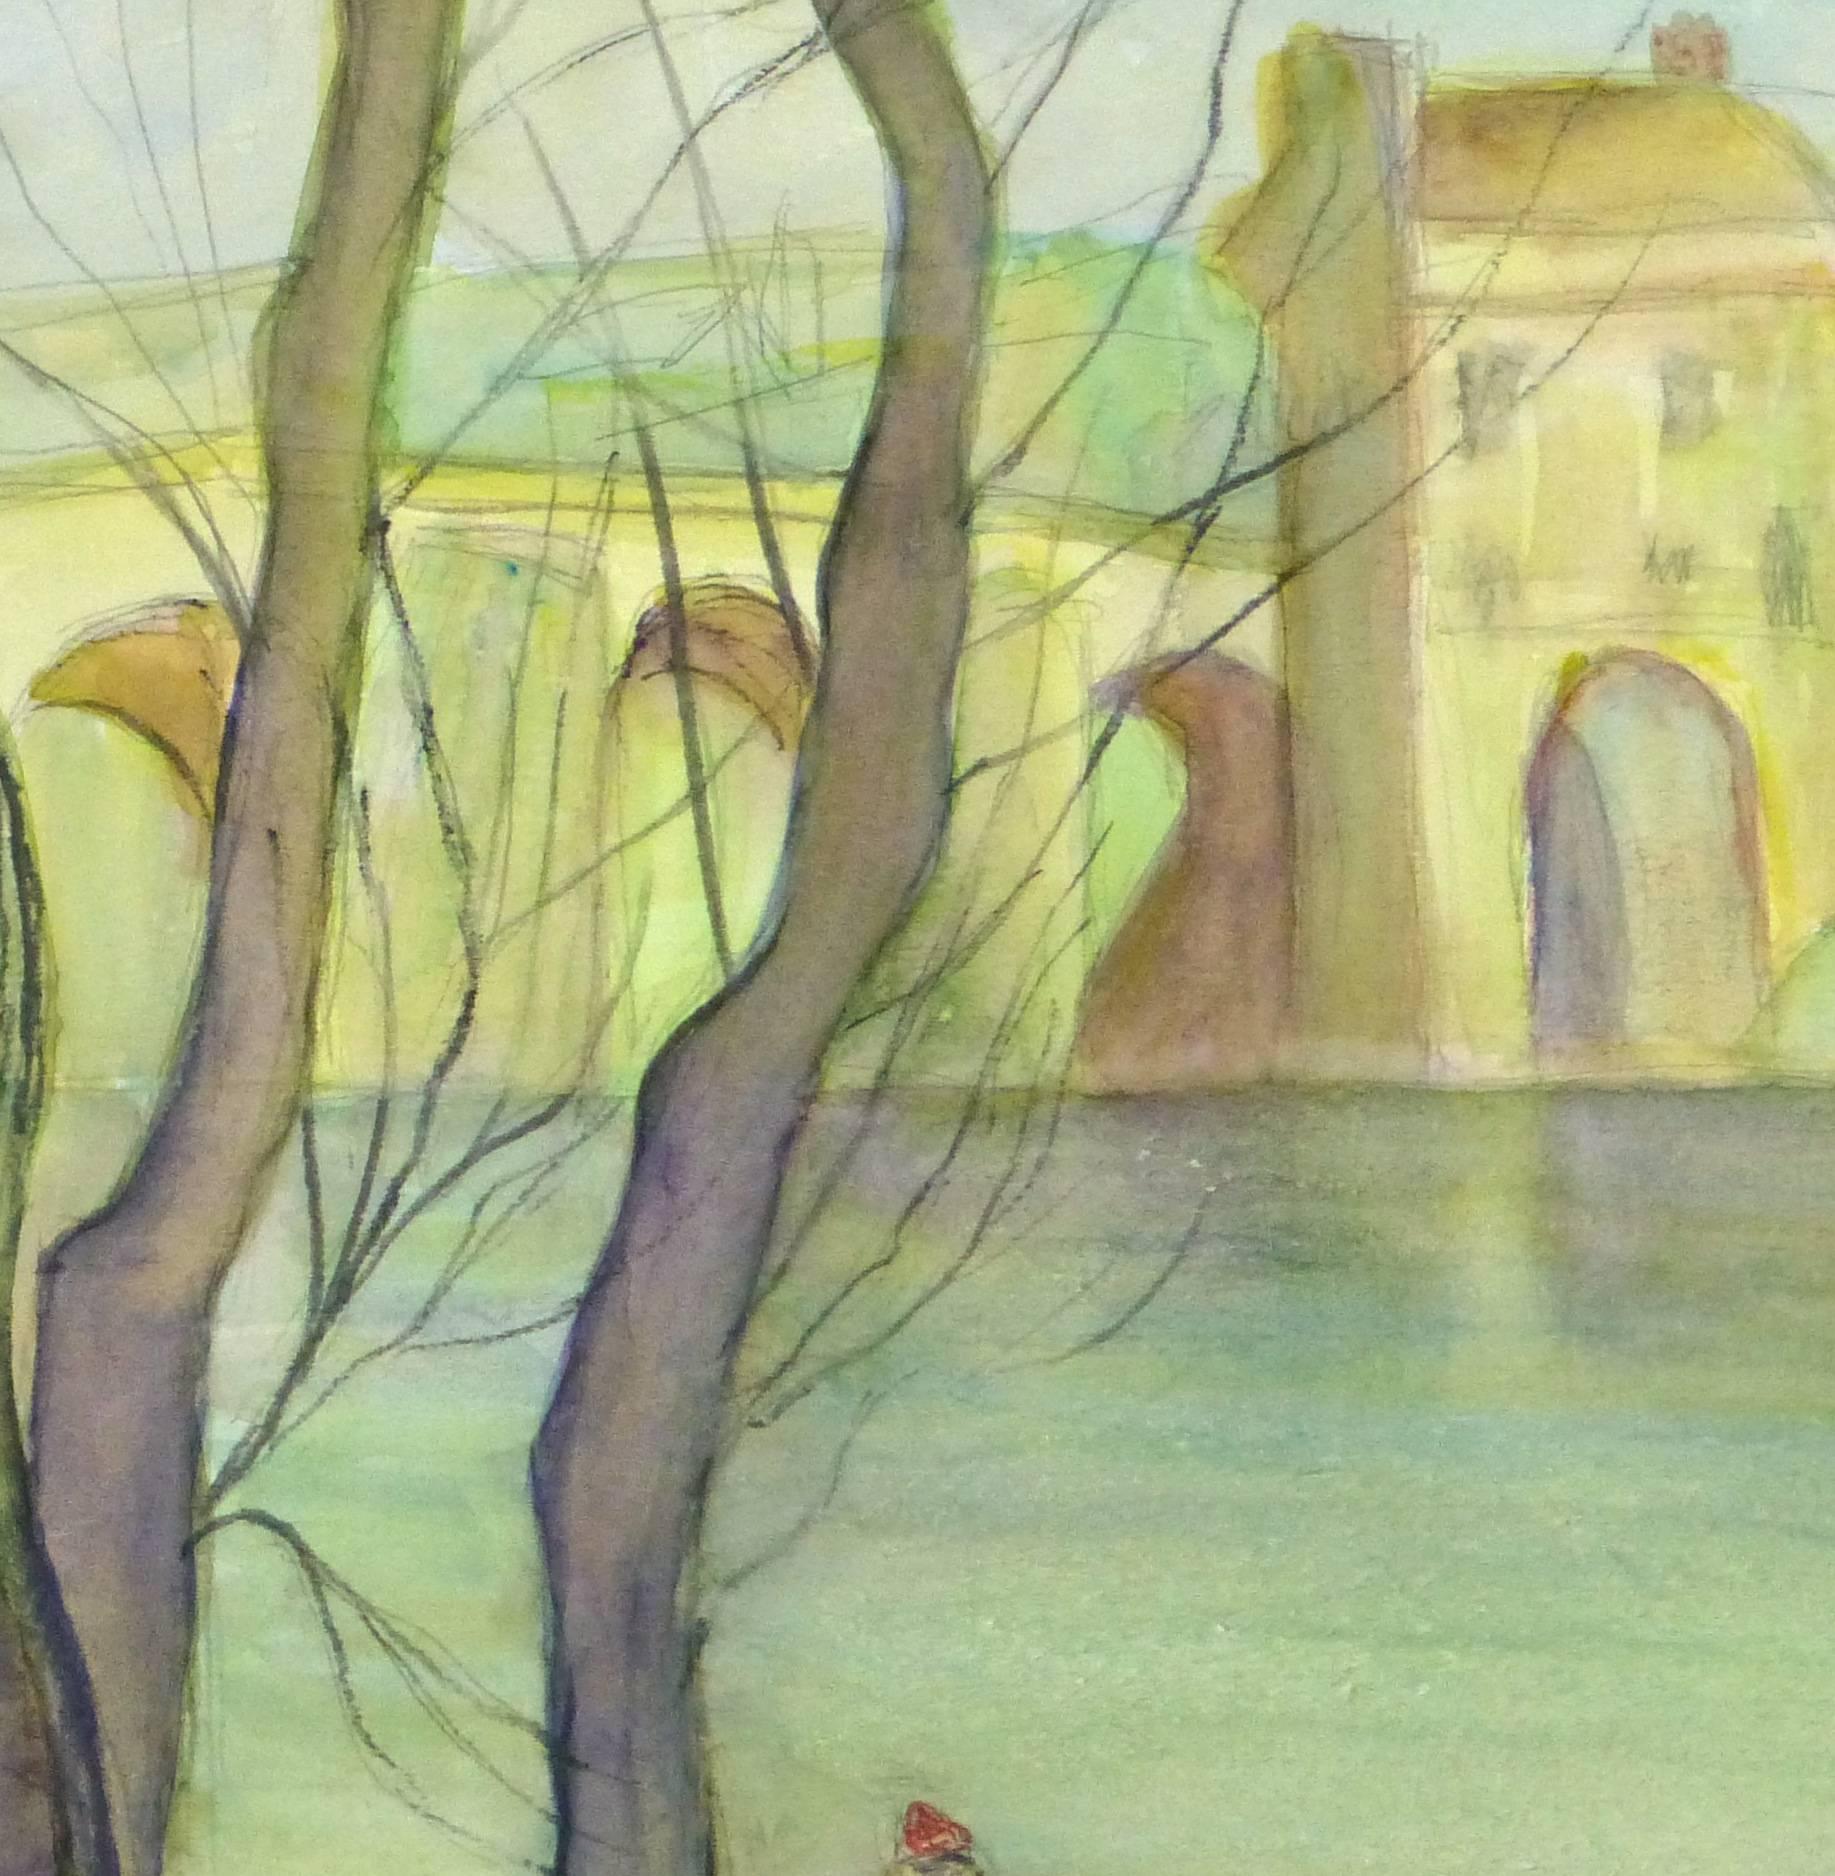 Vintage French Watercolor Landscape - Loire Valley, France - Art by Unknown